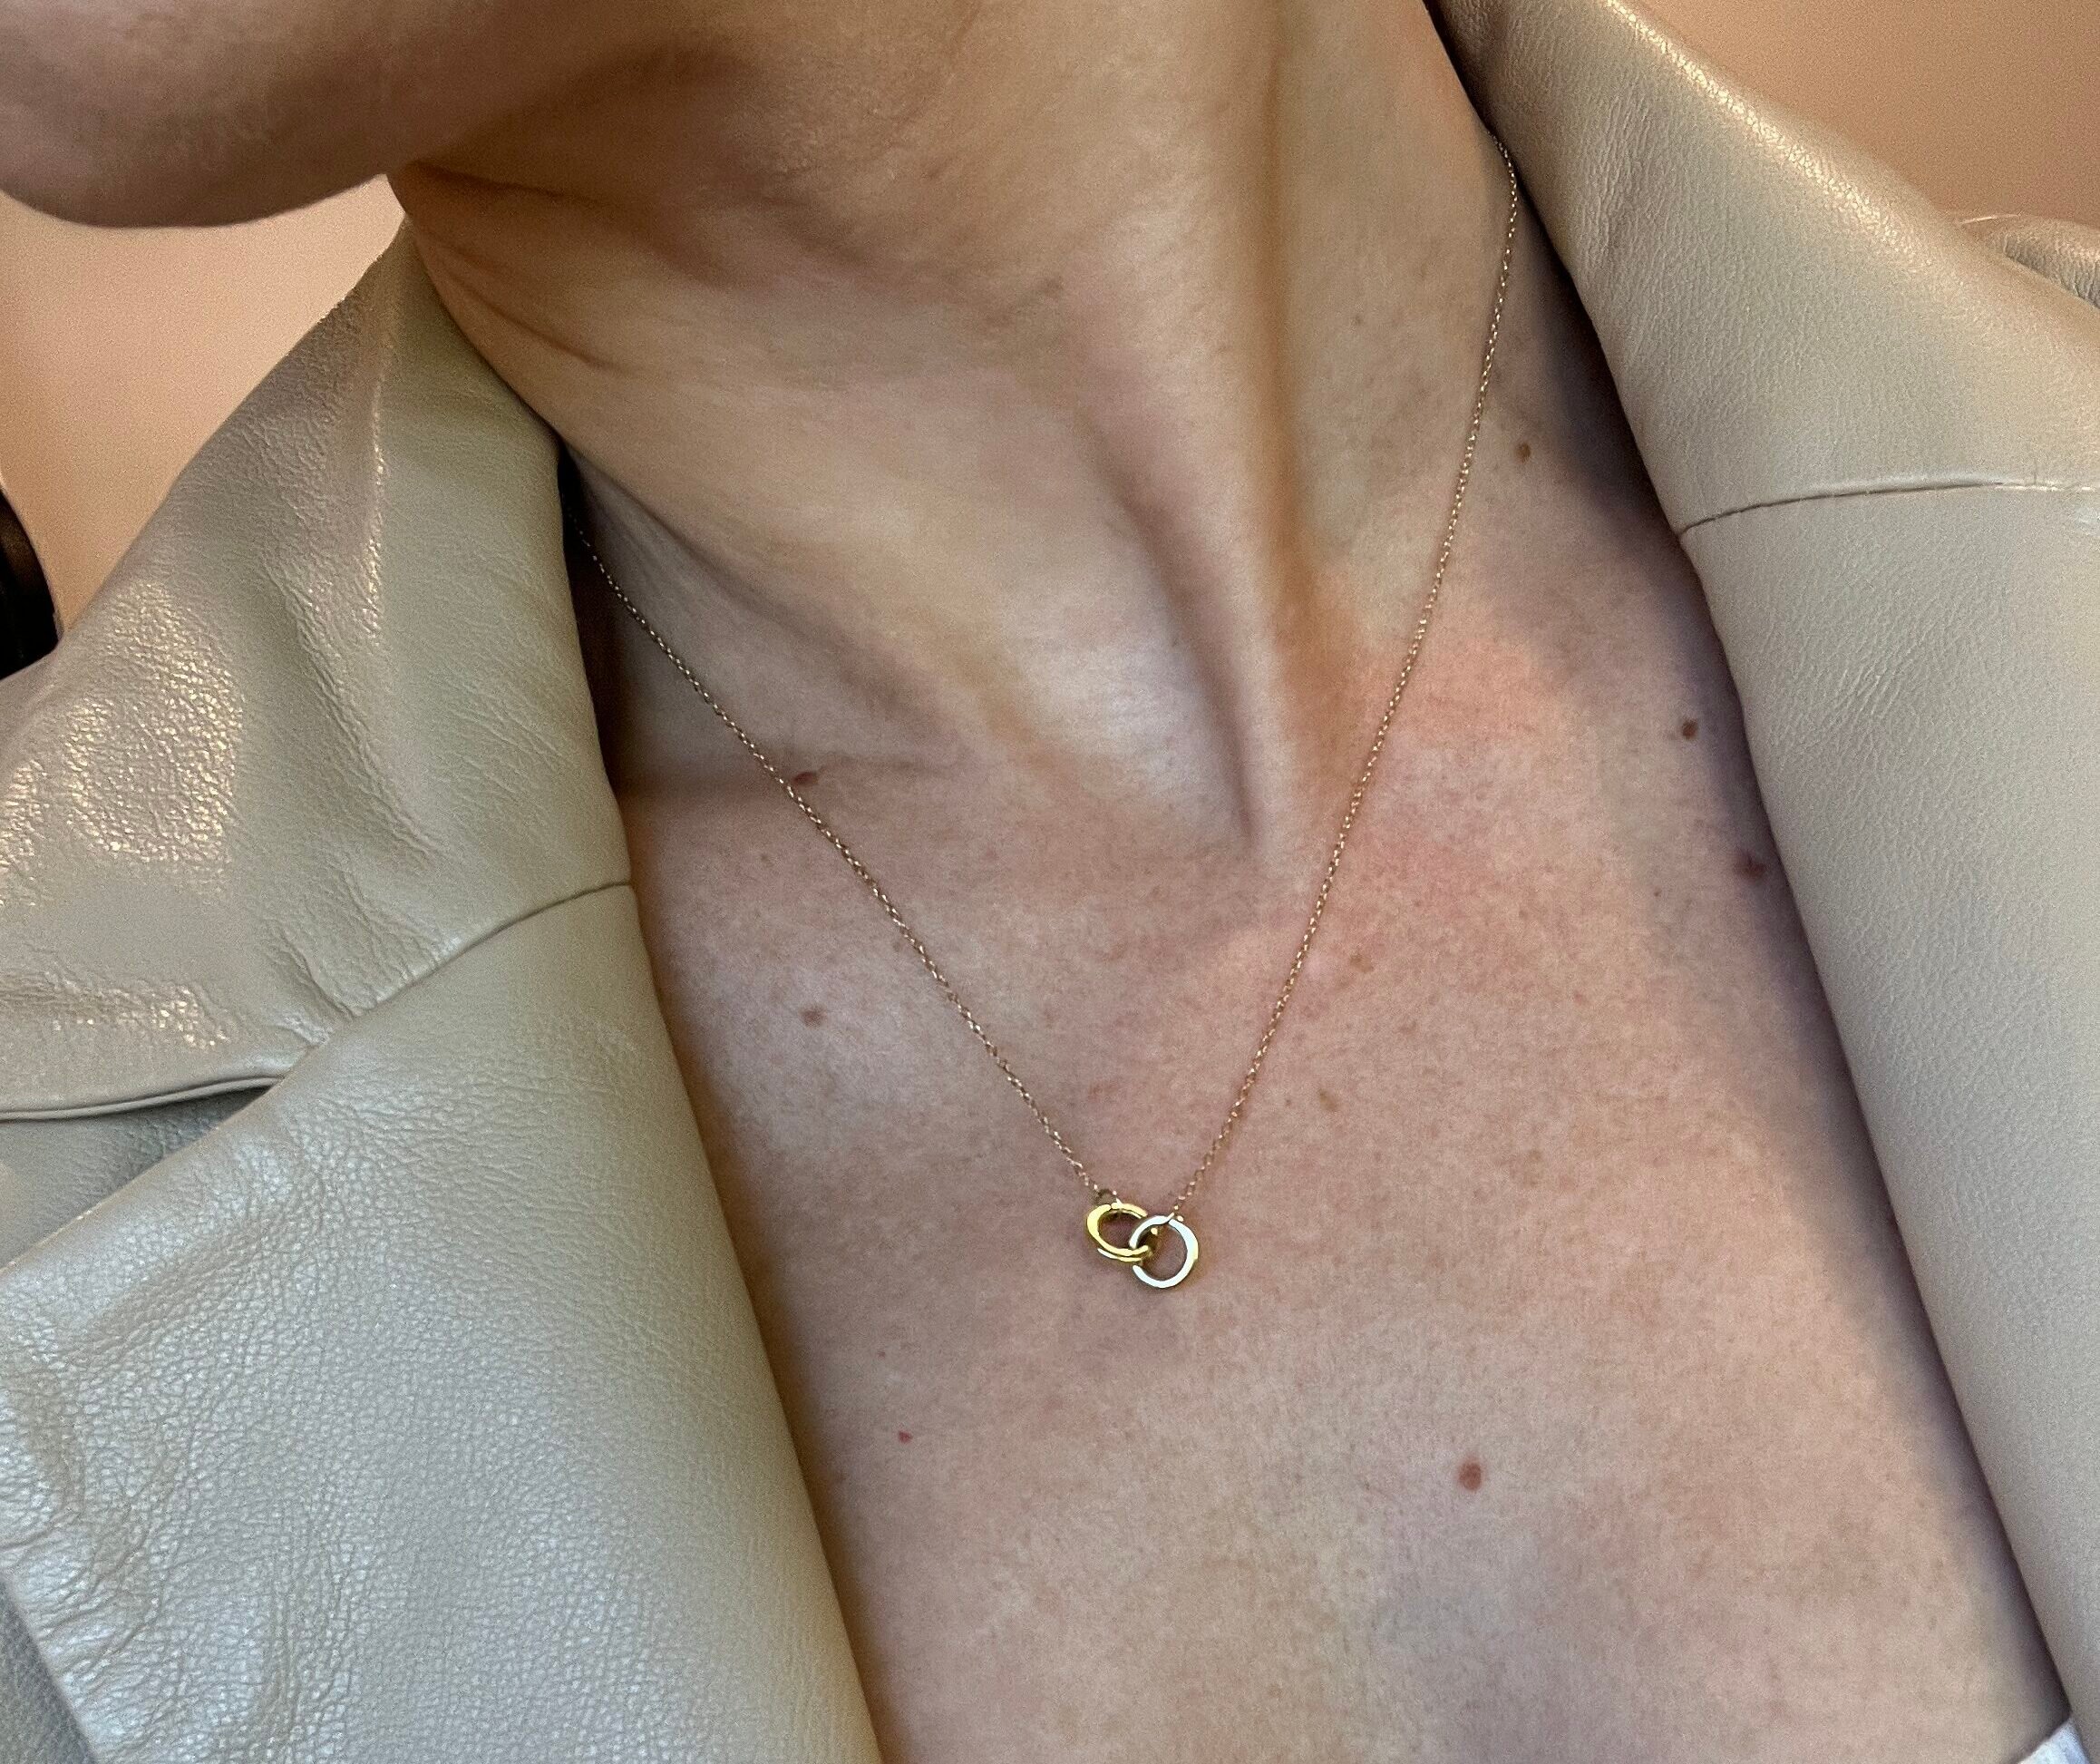 Aurate Connection vs. Cartier Love: I Swapped My Cartier Necklace for this $400 Solid Gold One